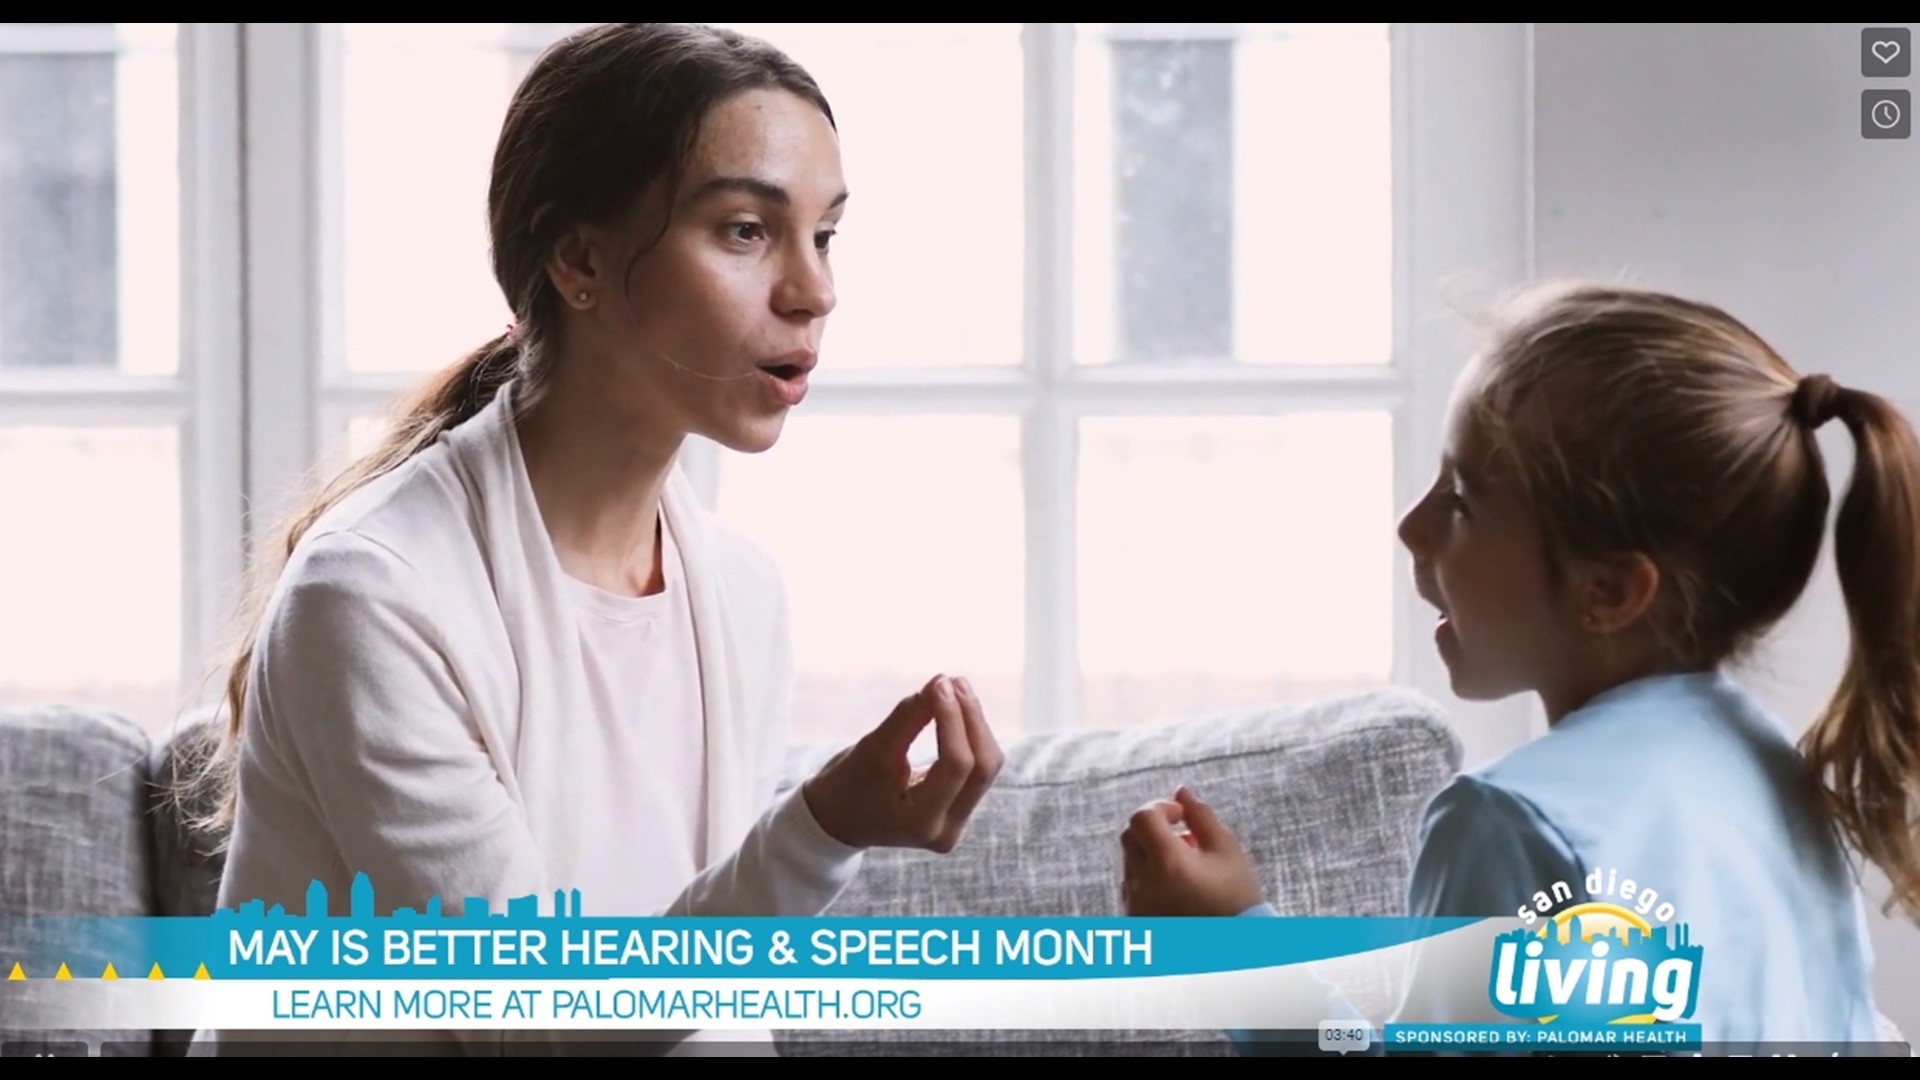 Speech and language disorders are common in children, but families often don’t know the early signs. Sponsored by: Palomar Health